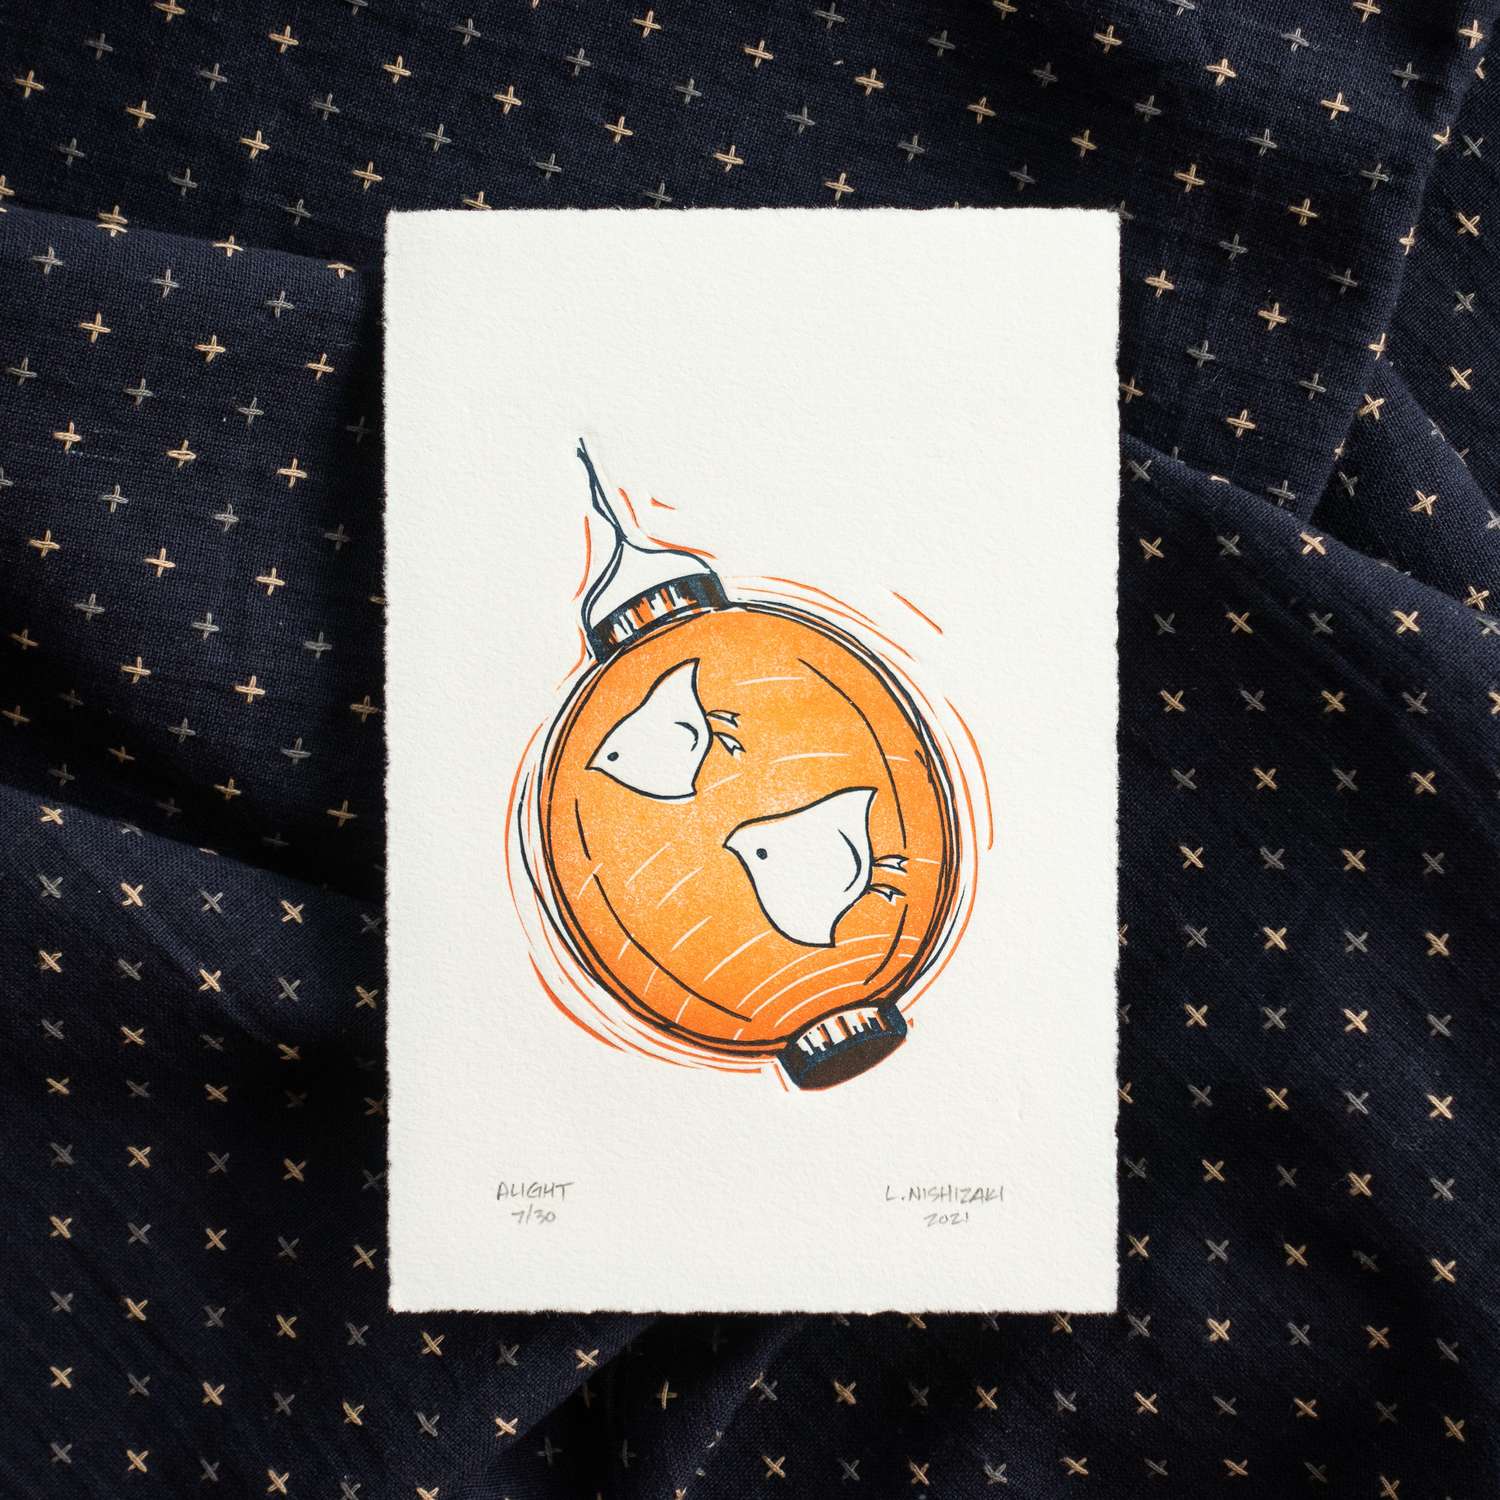 A rectangular print sits on top of crumpled dark navy fabric with light-colored checks. The print depicts an orange paper lantern with two chidori flying across the face towards the left. The lantern is drawn in sketchy lines to depict motion. The print is signed along the bottom edge.